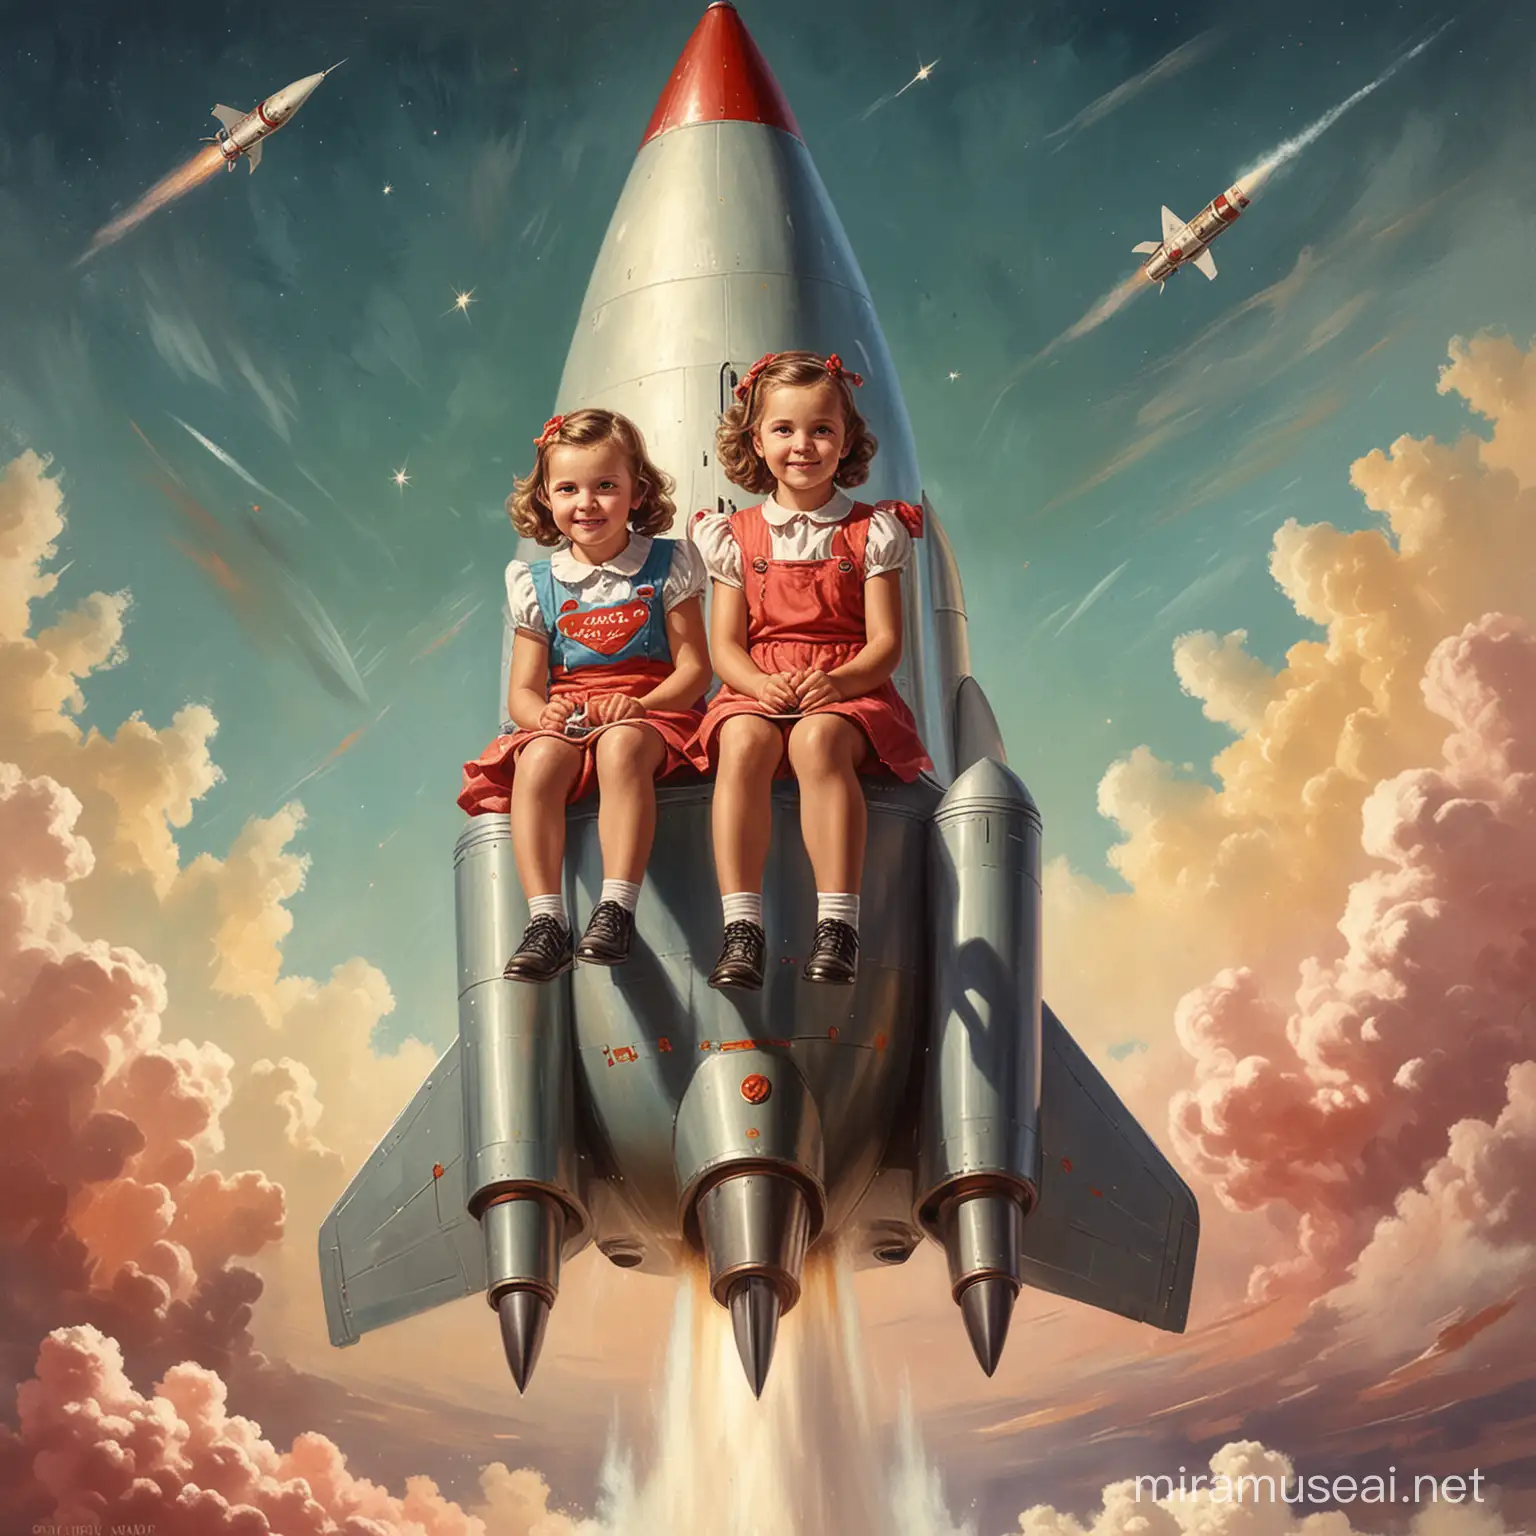 Painting of 2 little girls  in the foreground facing the camera, circa 1940, sitting on a rocket of love. Full color, vintage retro style.